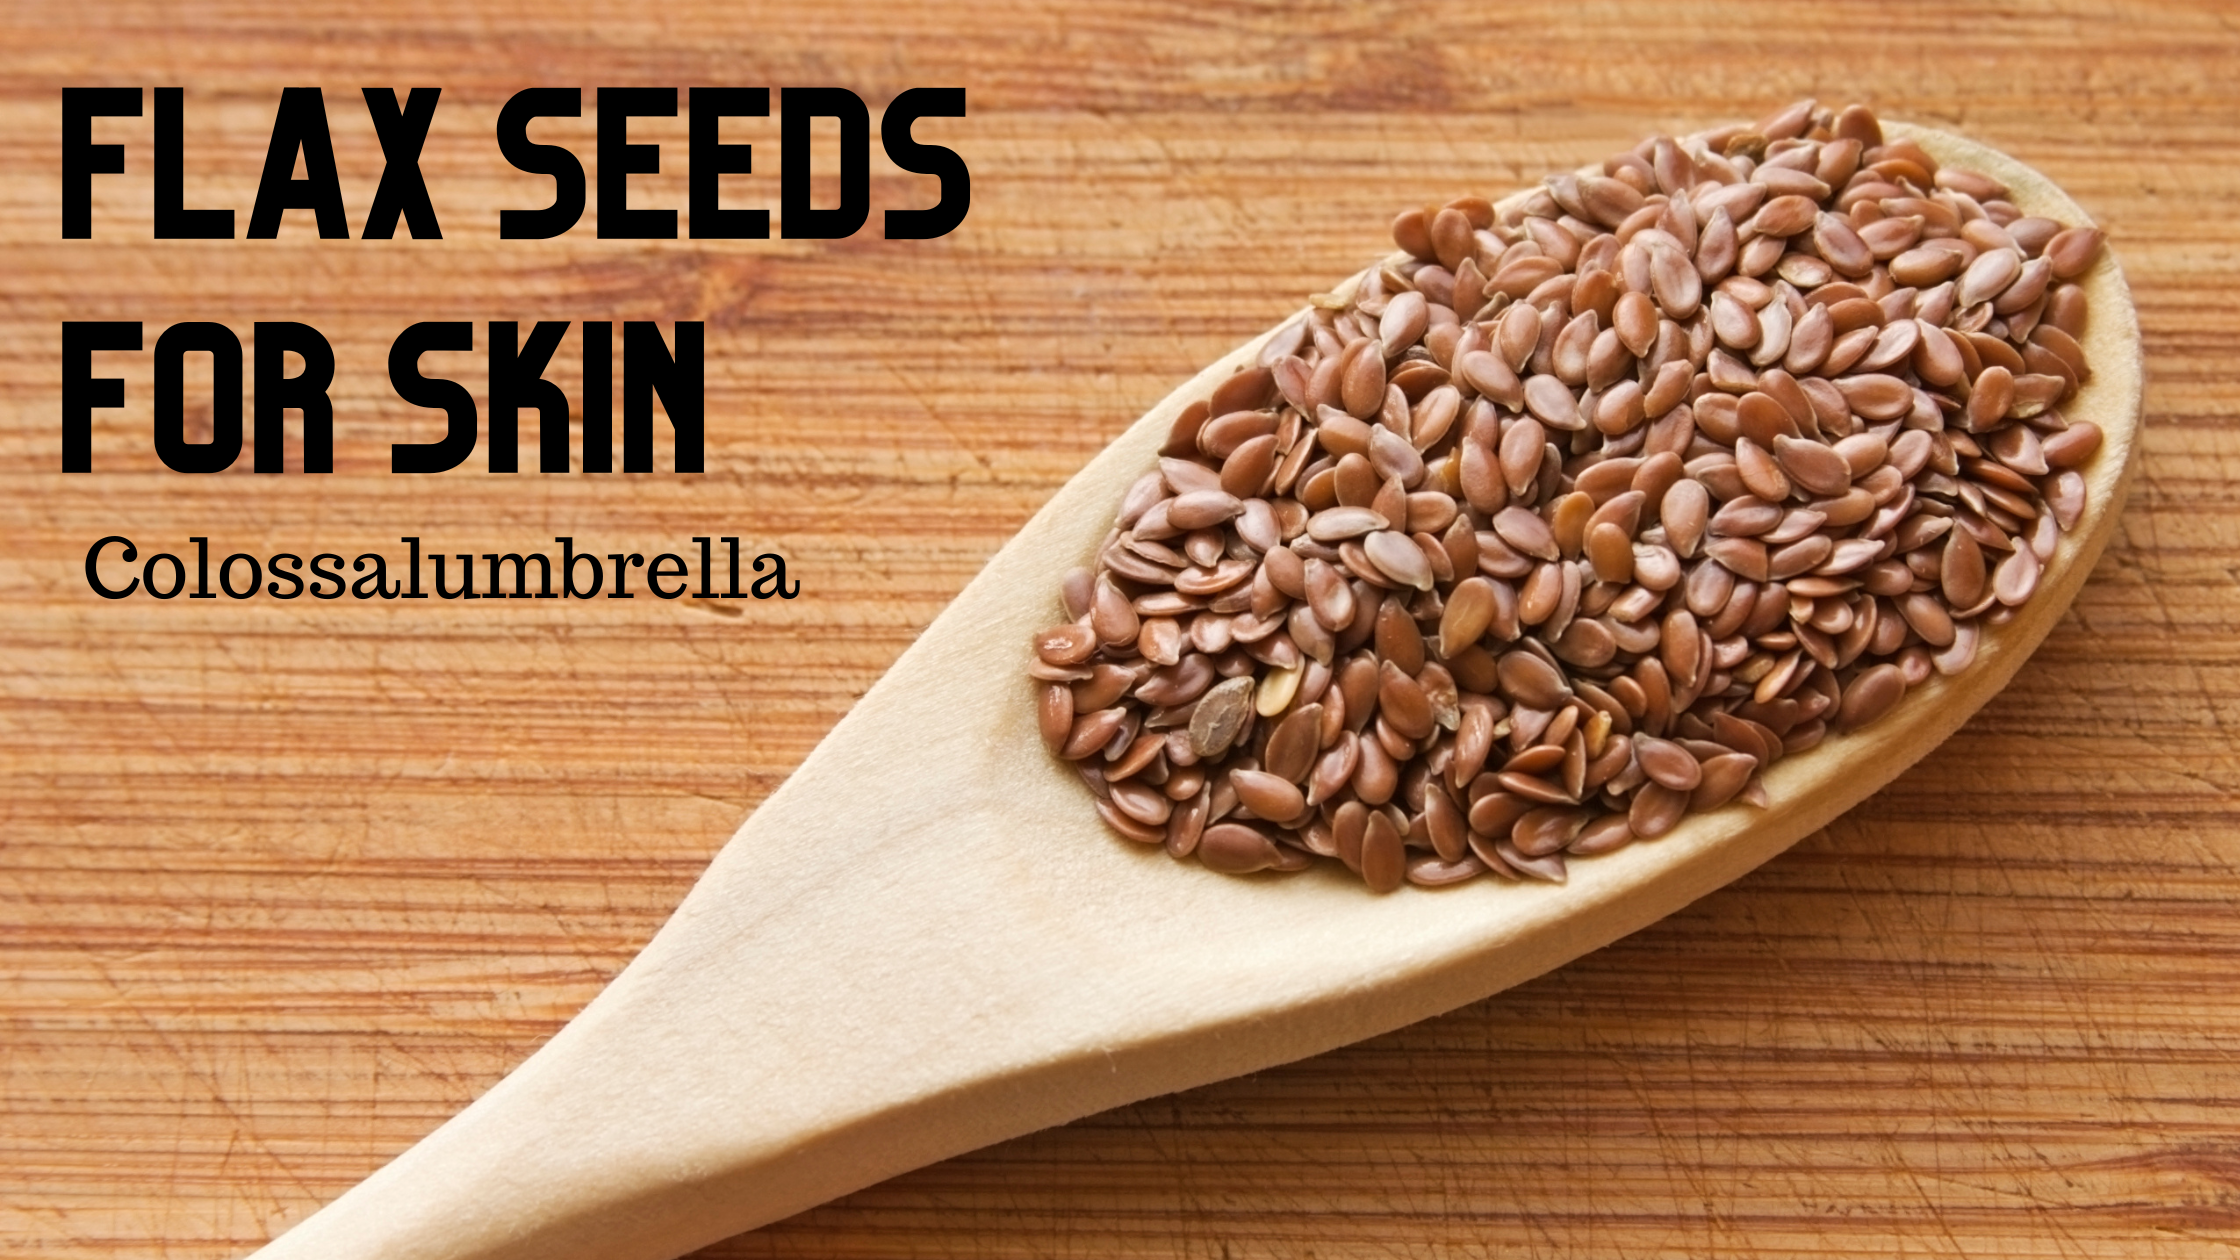 9 Surprising Flax Seeds Benefits for Skin- Learn how to use flax seeds for skin!